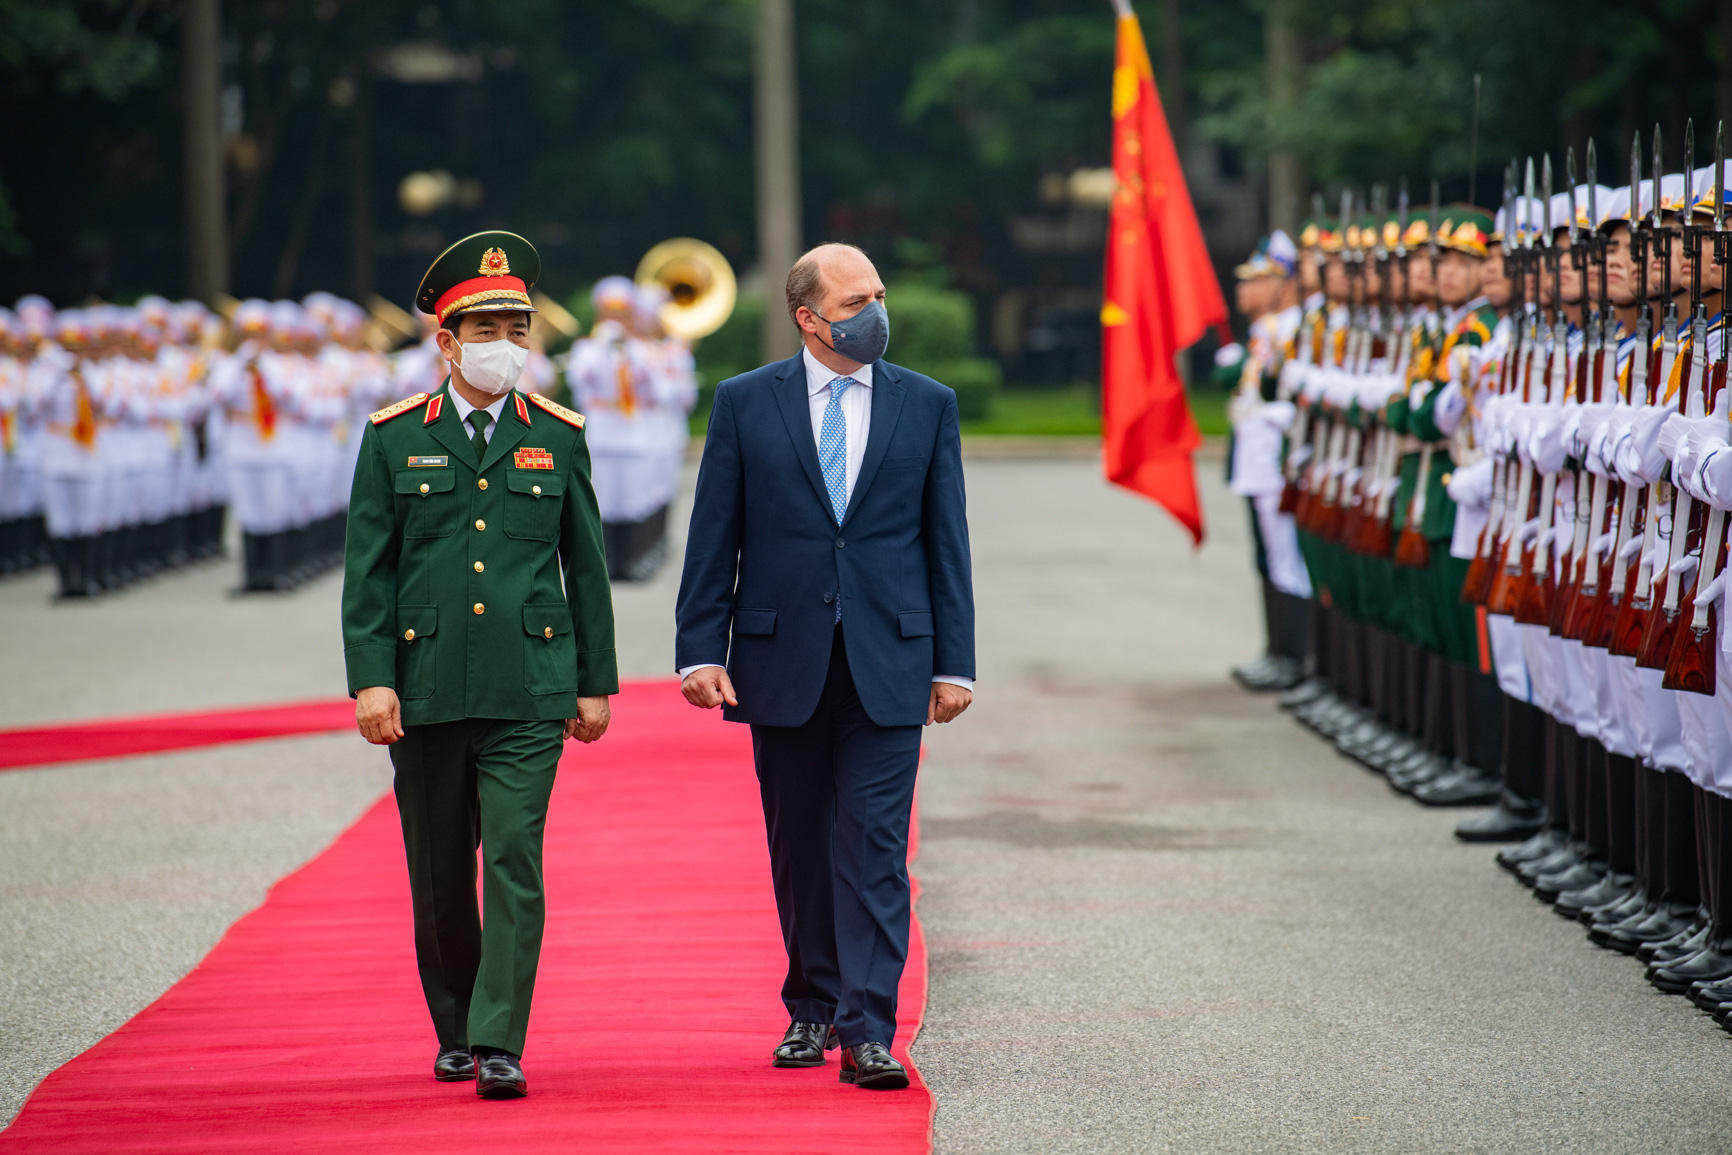 UK Secretary of State for Defense pays first official visit to Vietnam